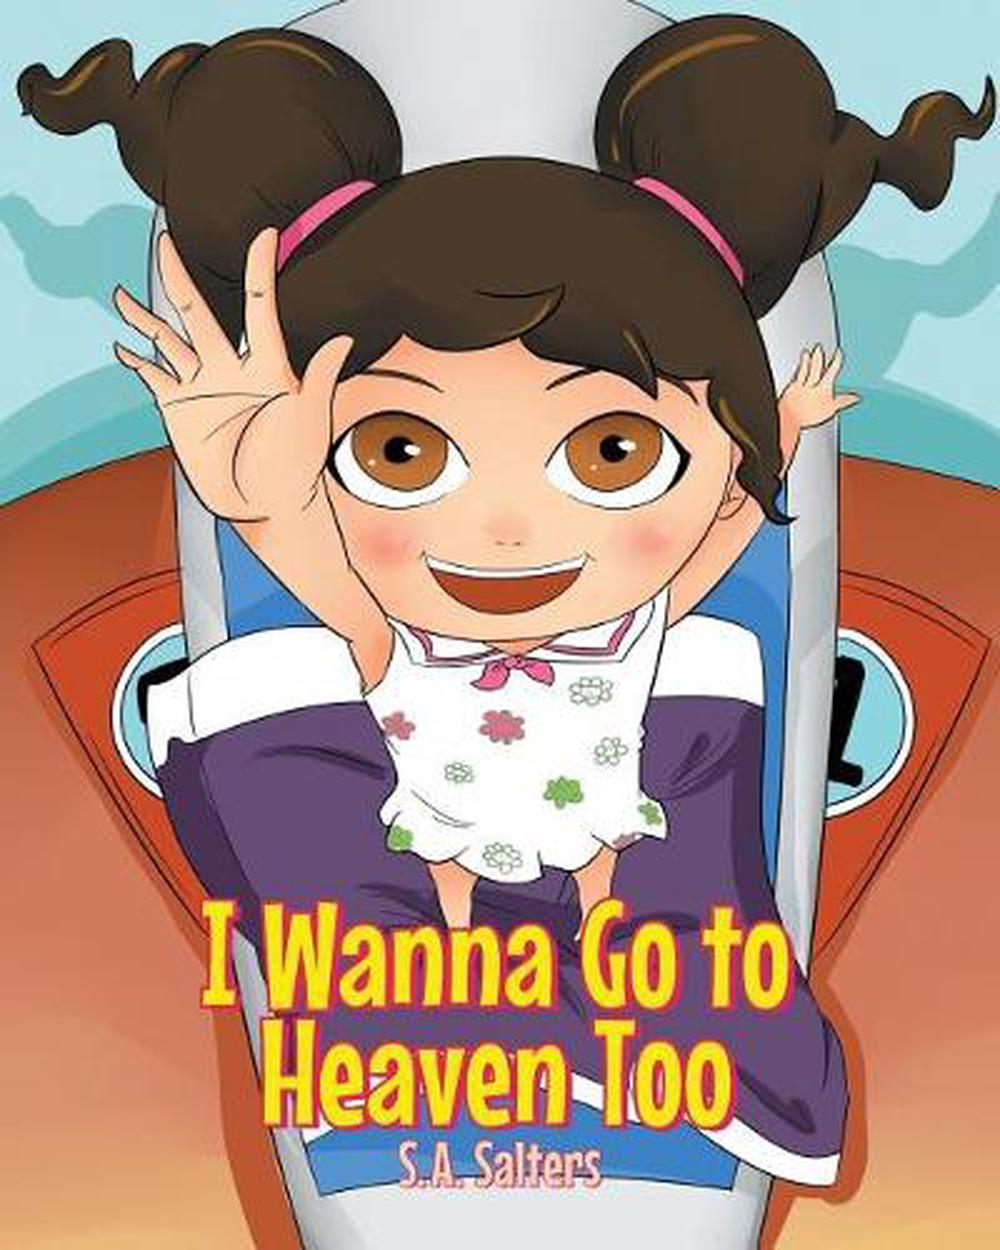 I Wanna Go to Heaven Too by S. a Salters (2017, Trade Paperback)